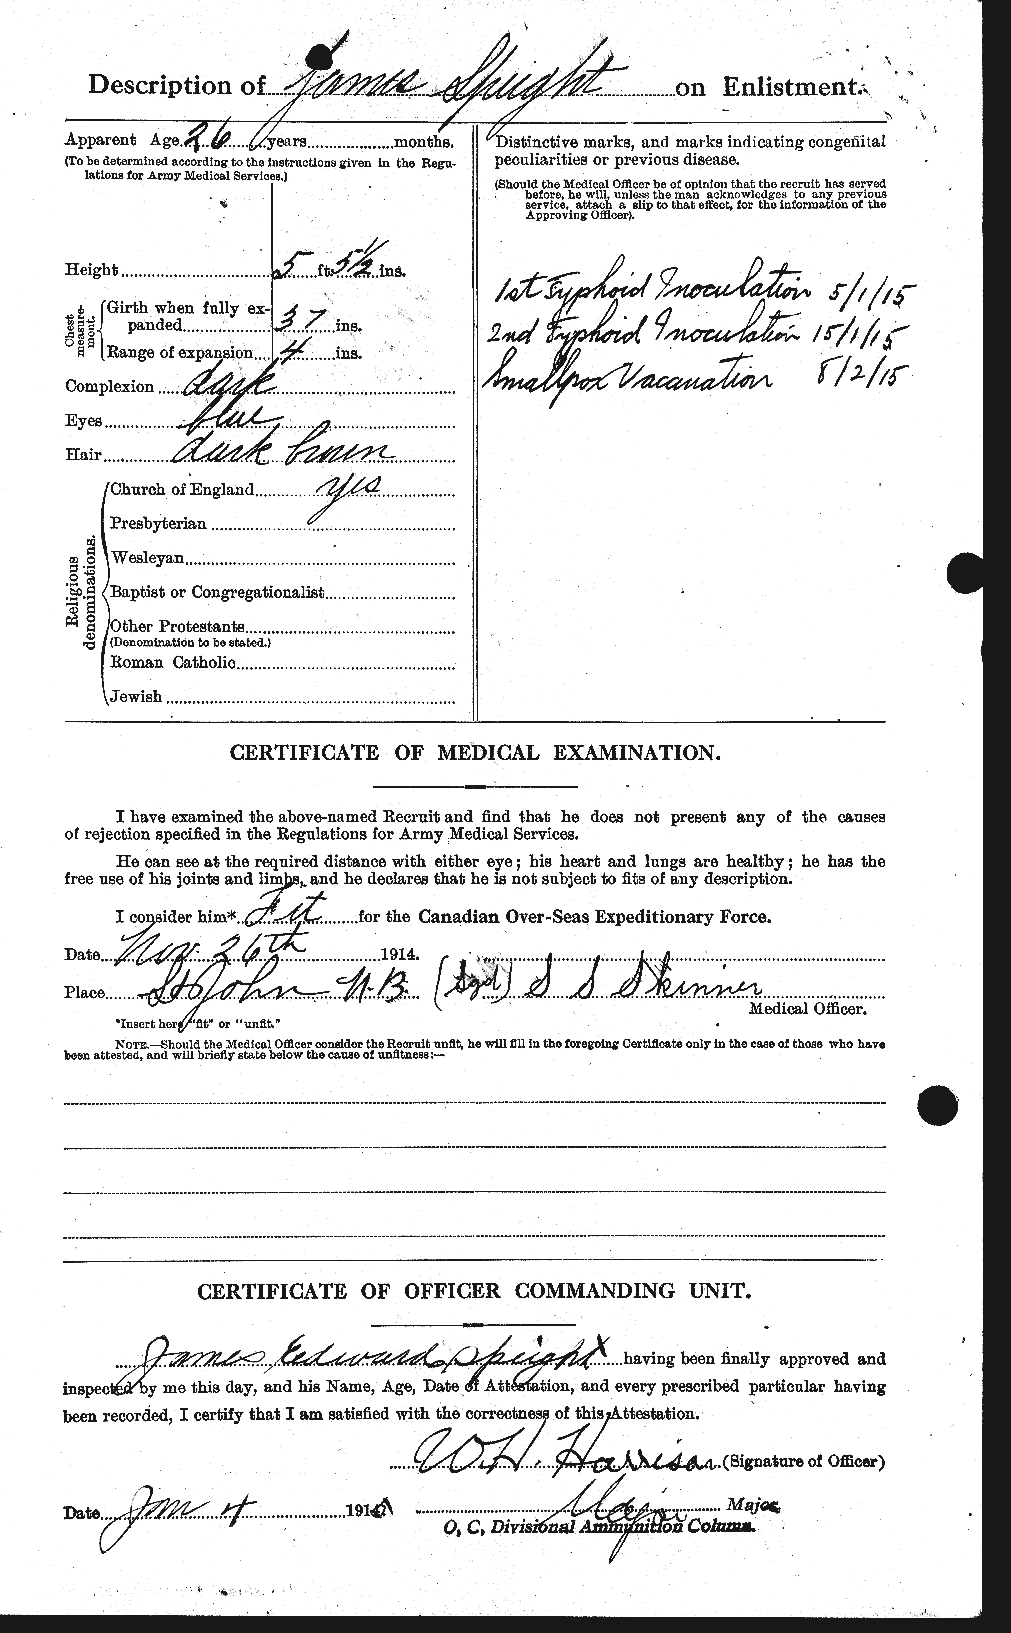 Personnel Records of the First World War - CEF 110069b